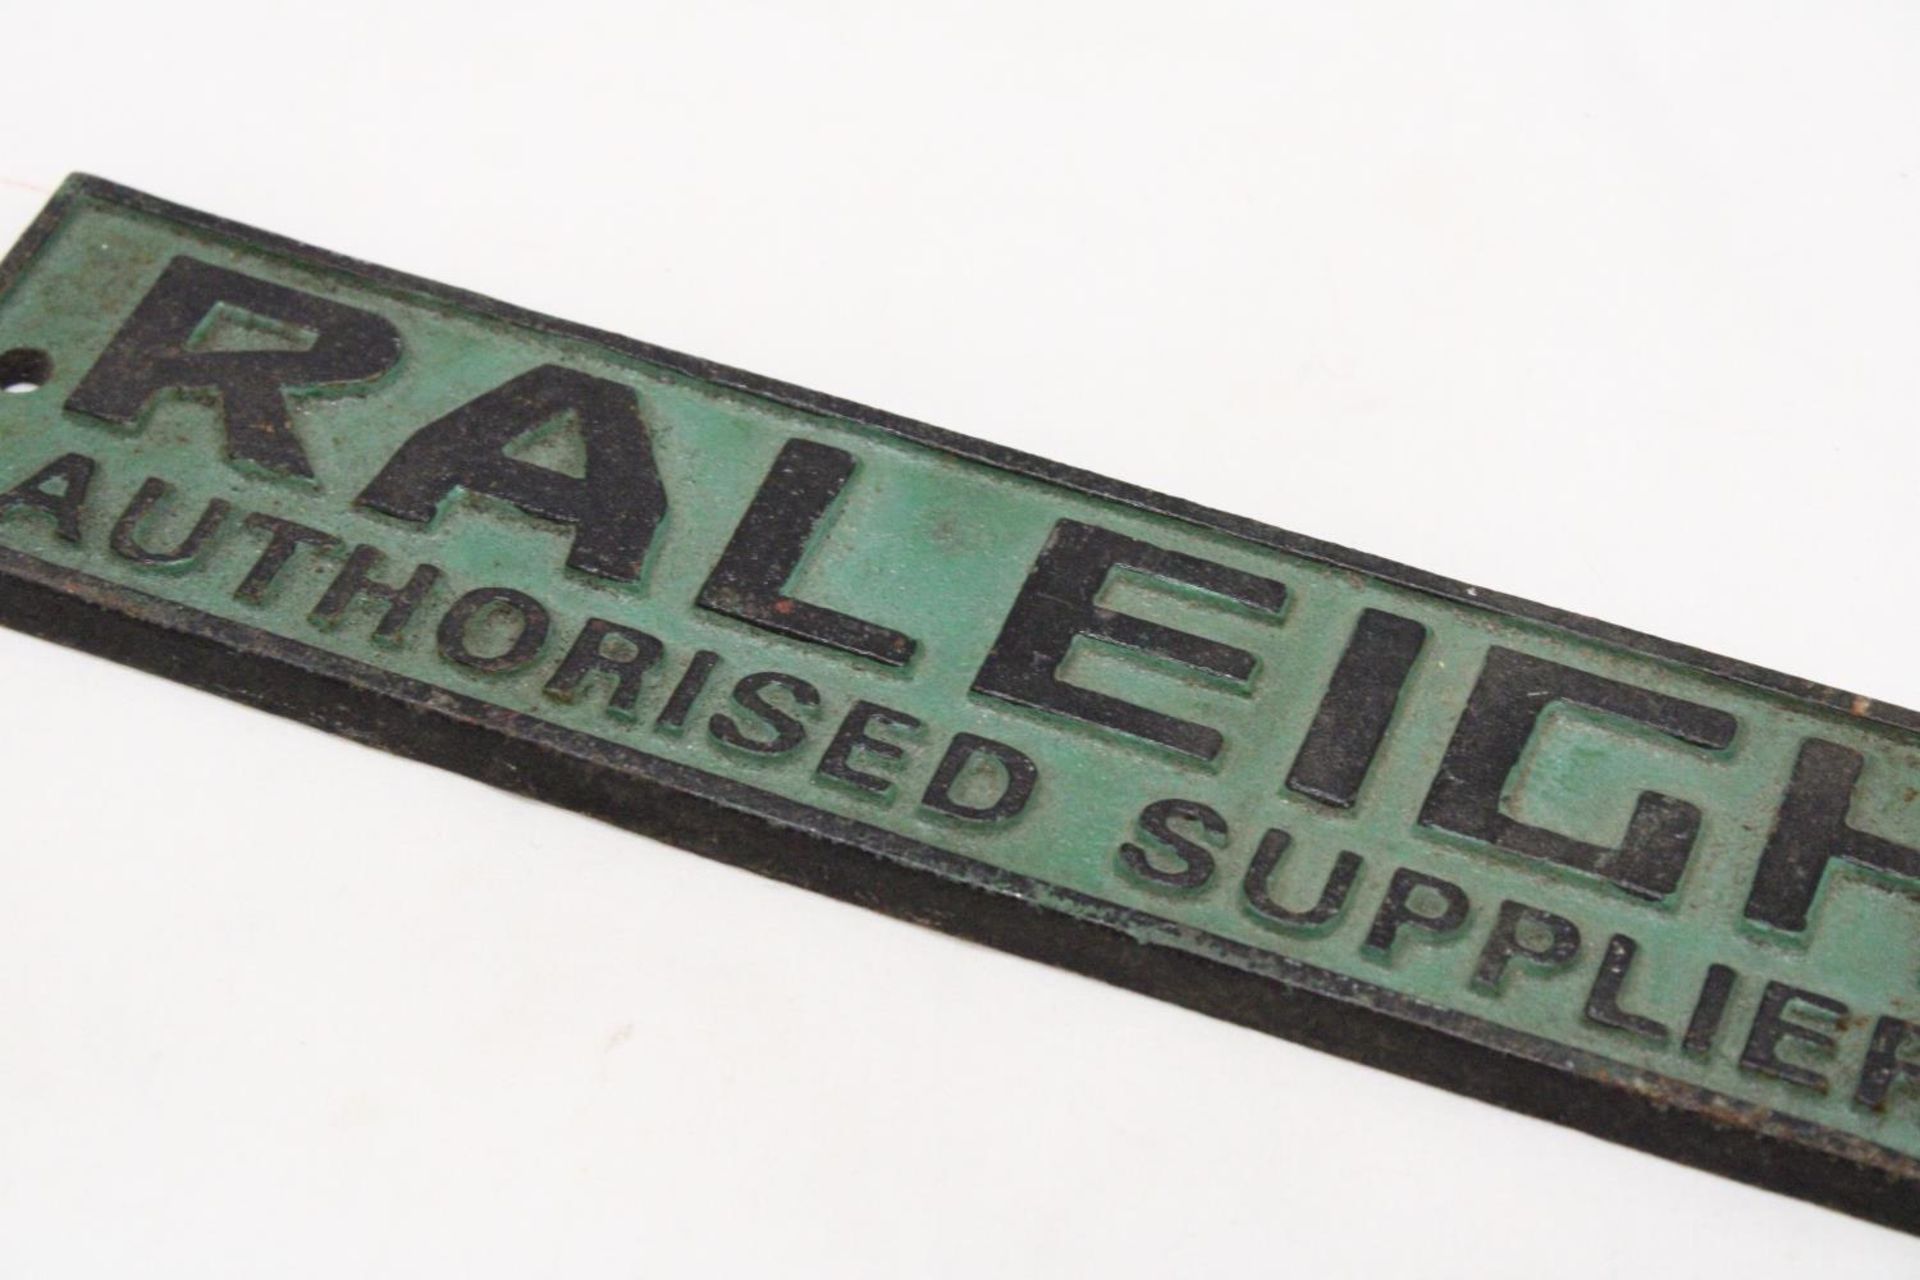 A CAST IRON RALEIGH AUTHORISED SUPPLIER SIGN - Image 2 of 3